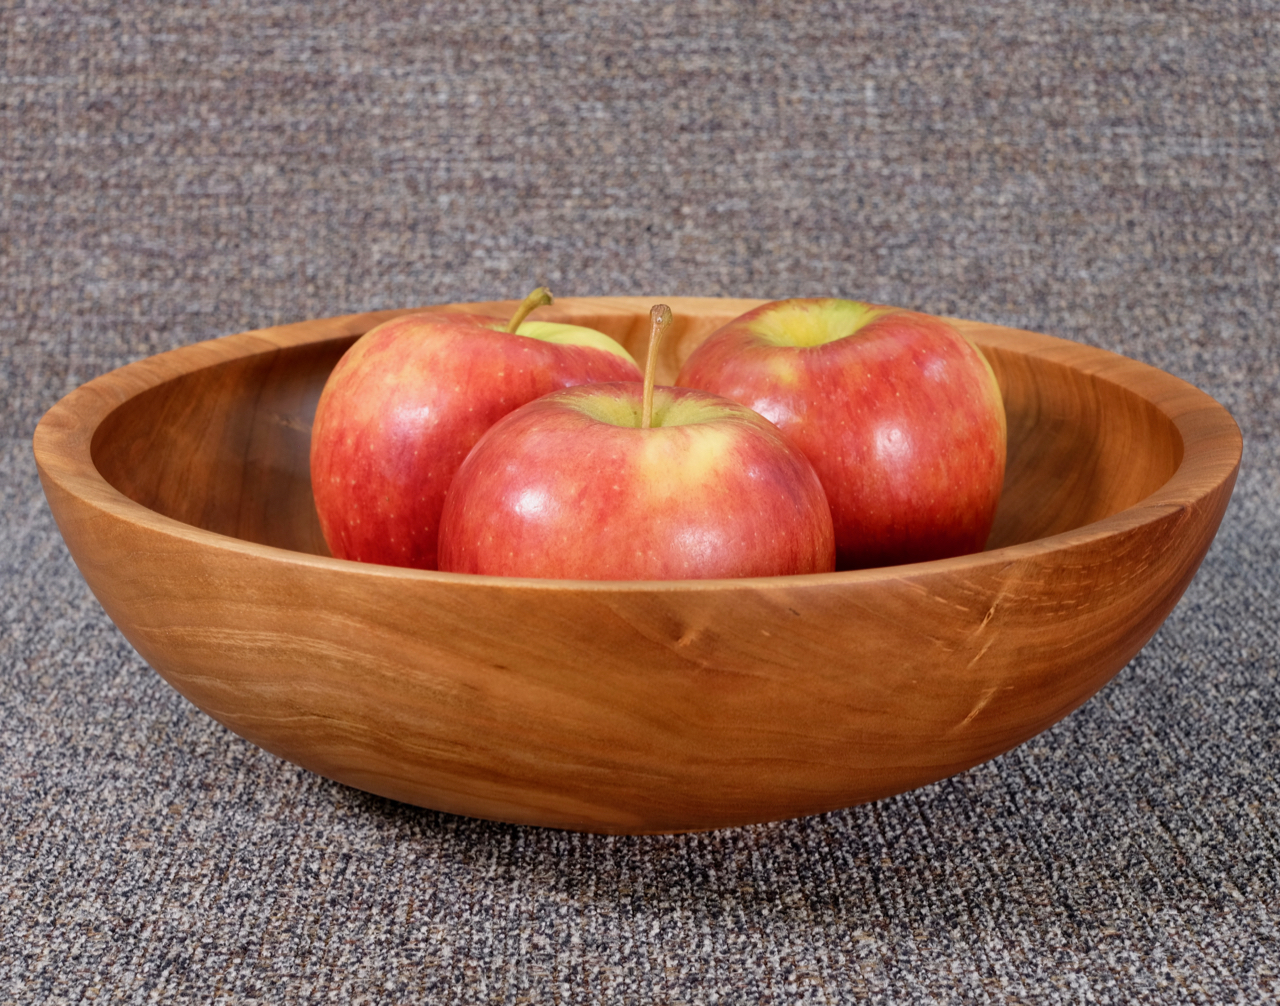 Black cherry bowl with apples